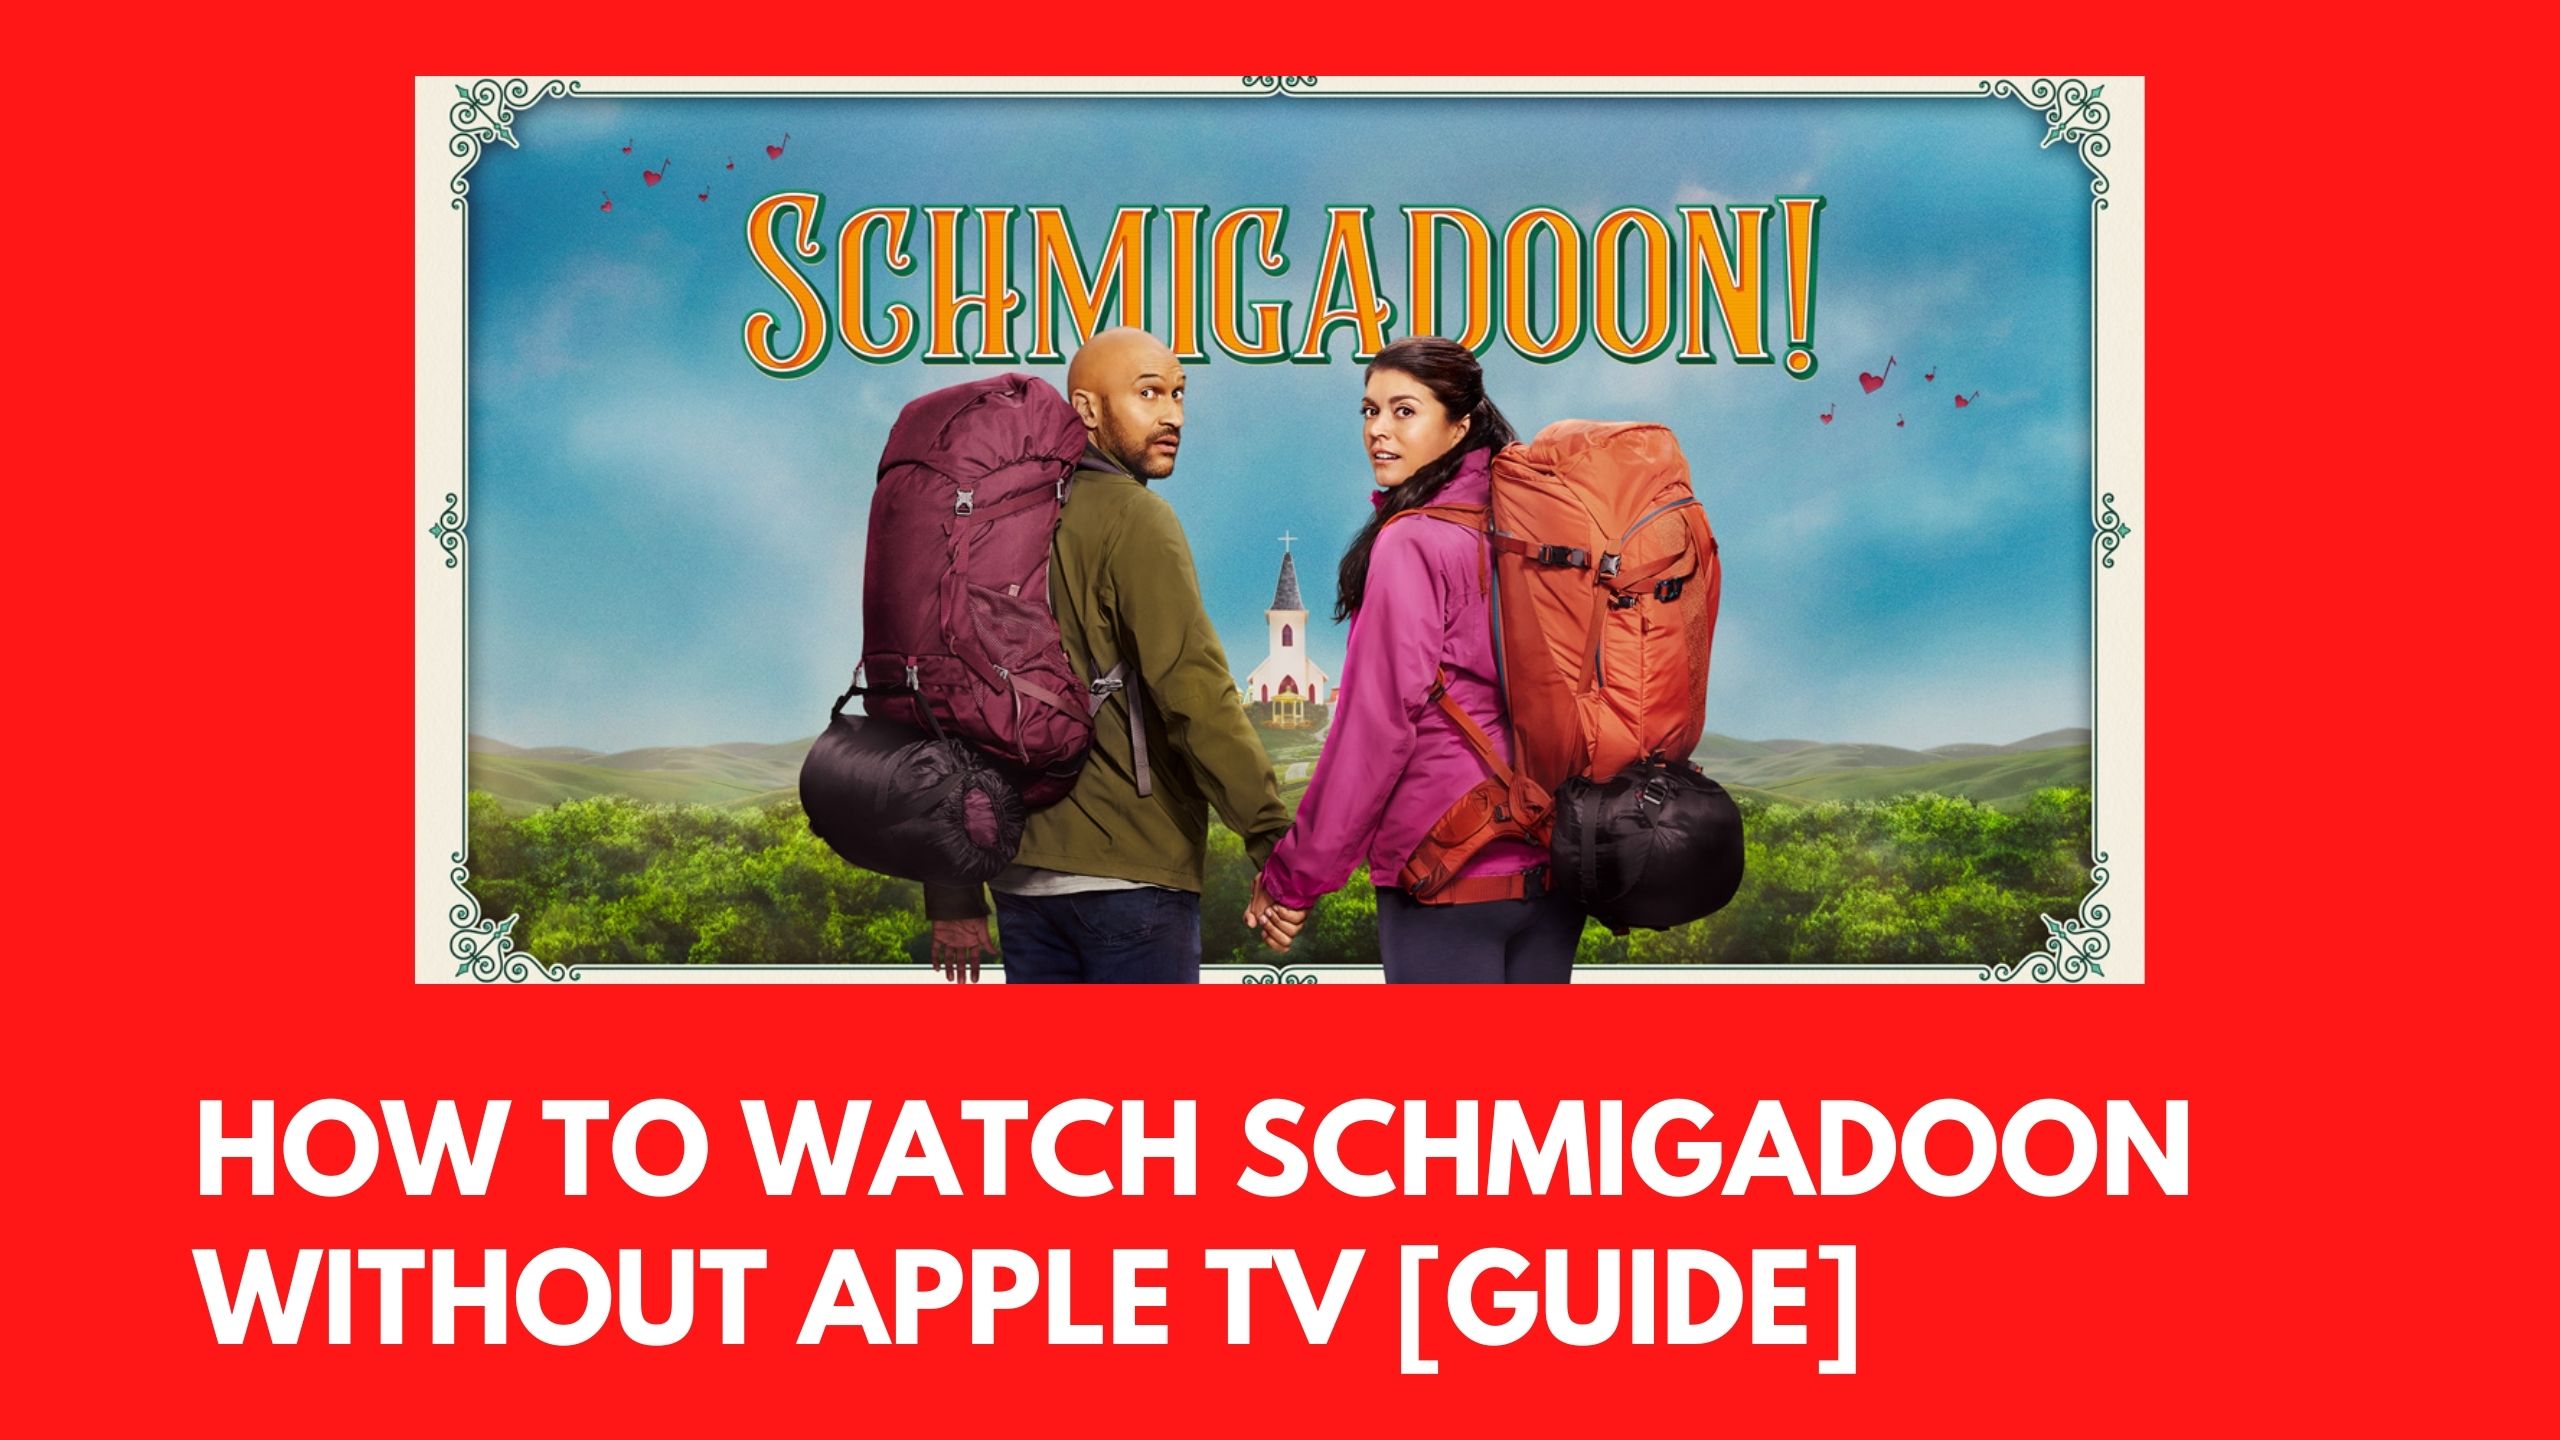 How to Watch Schmigadoon Without Apple TV